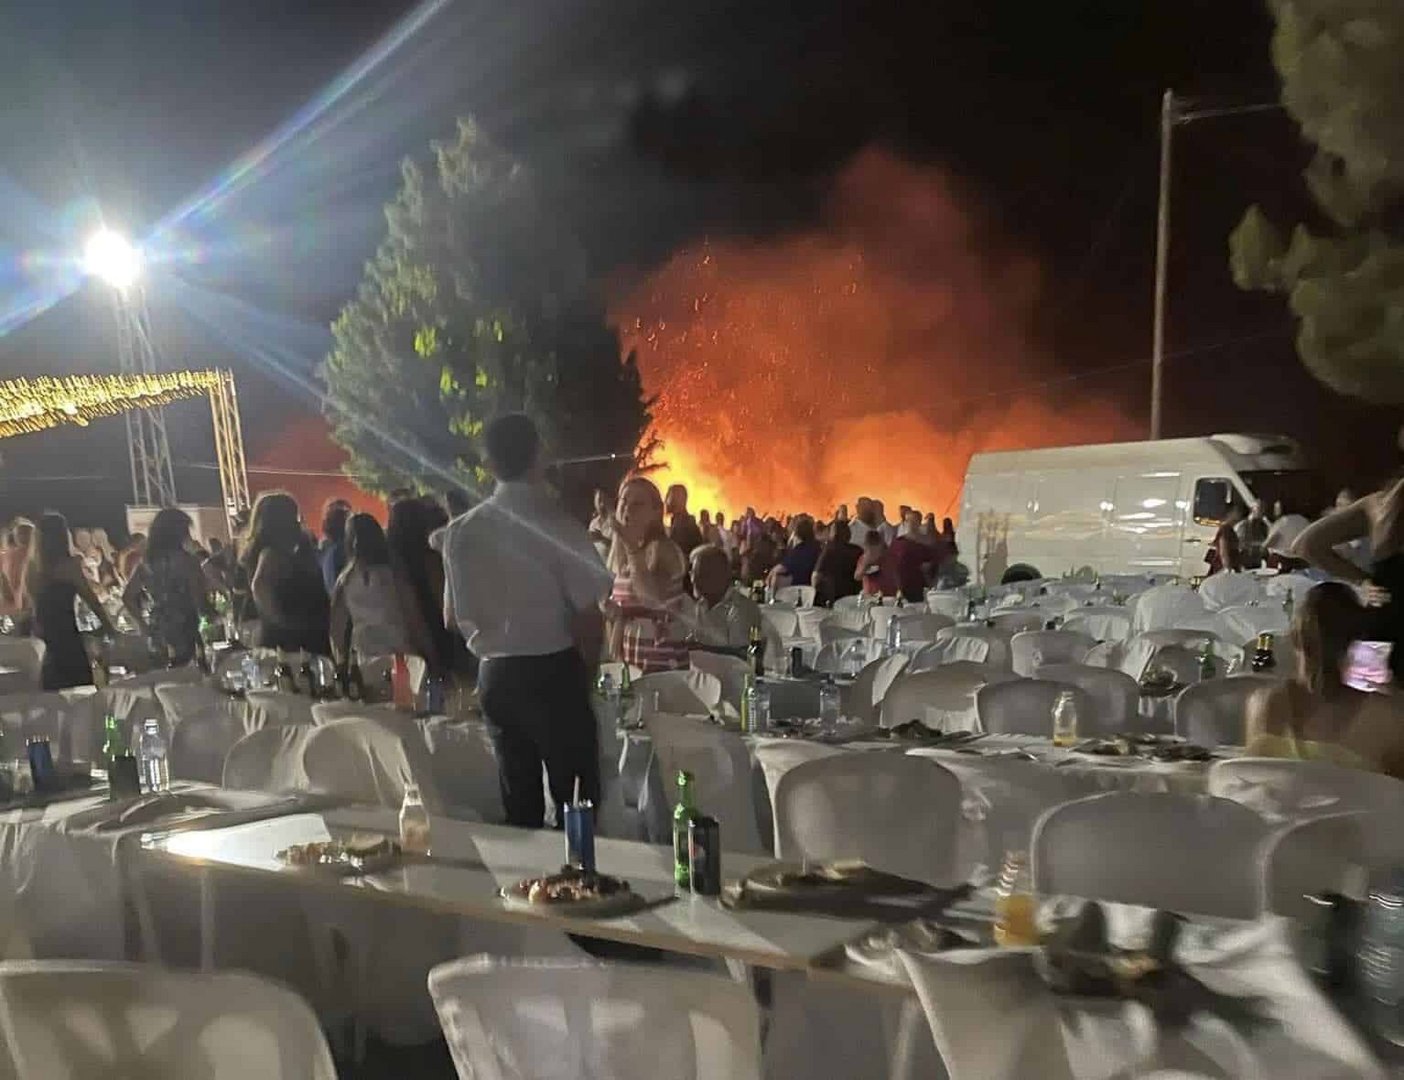 image Fireworks at wedding add to busy weekend for firefighters